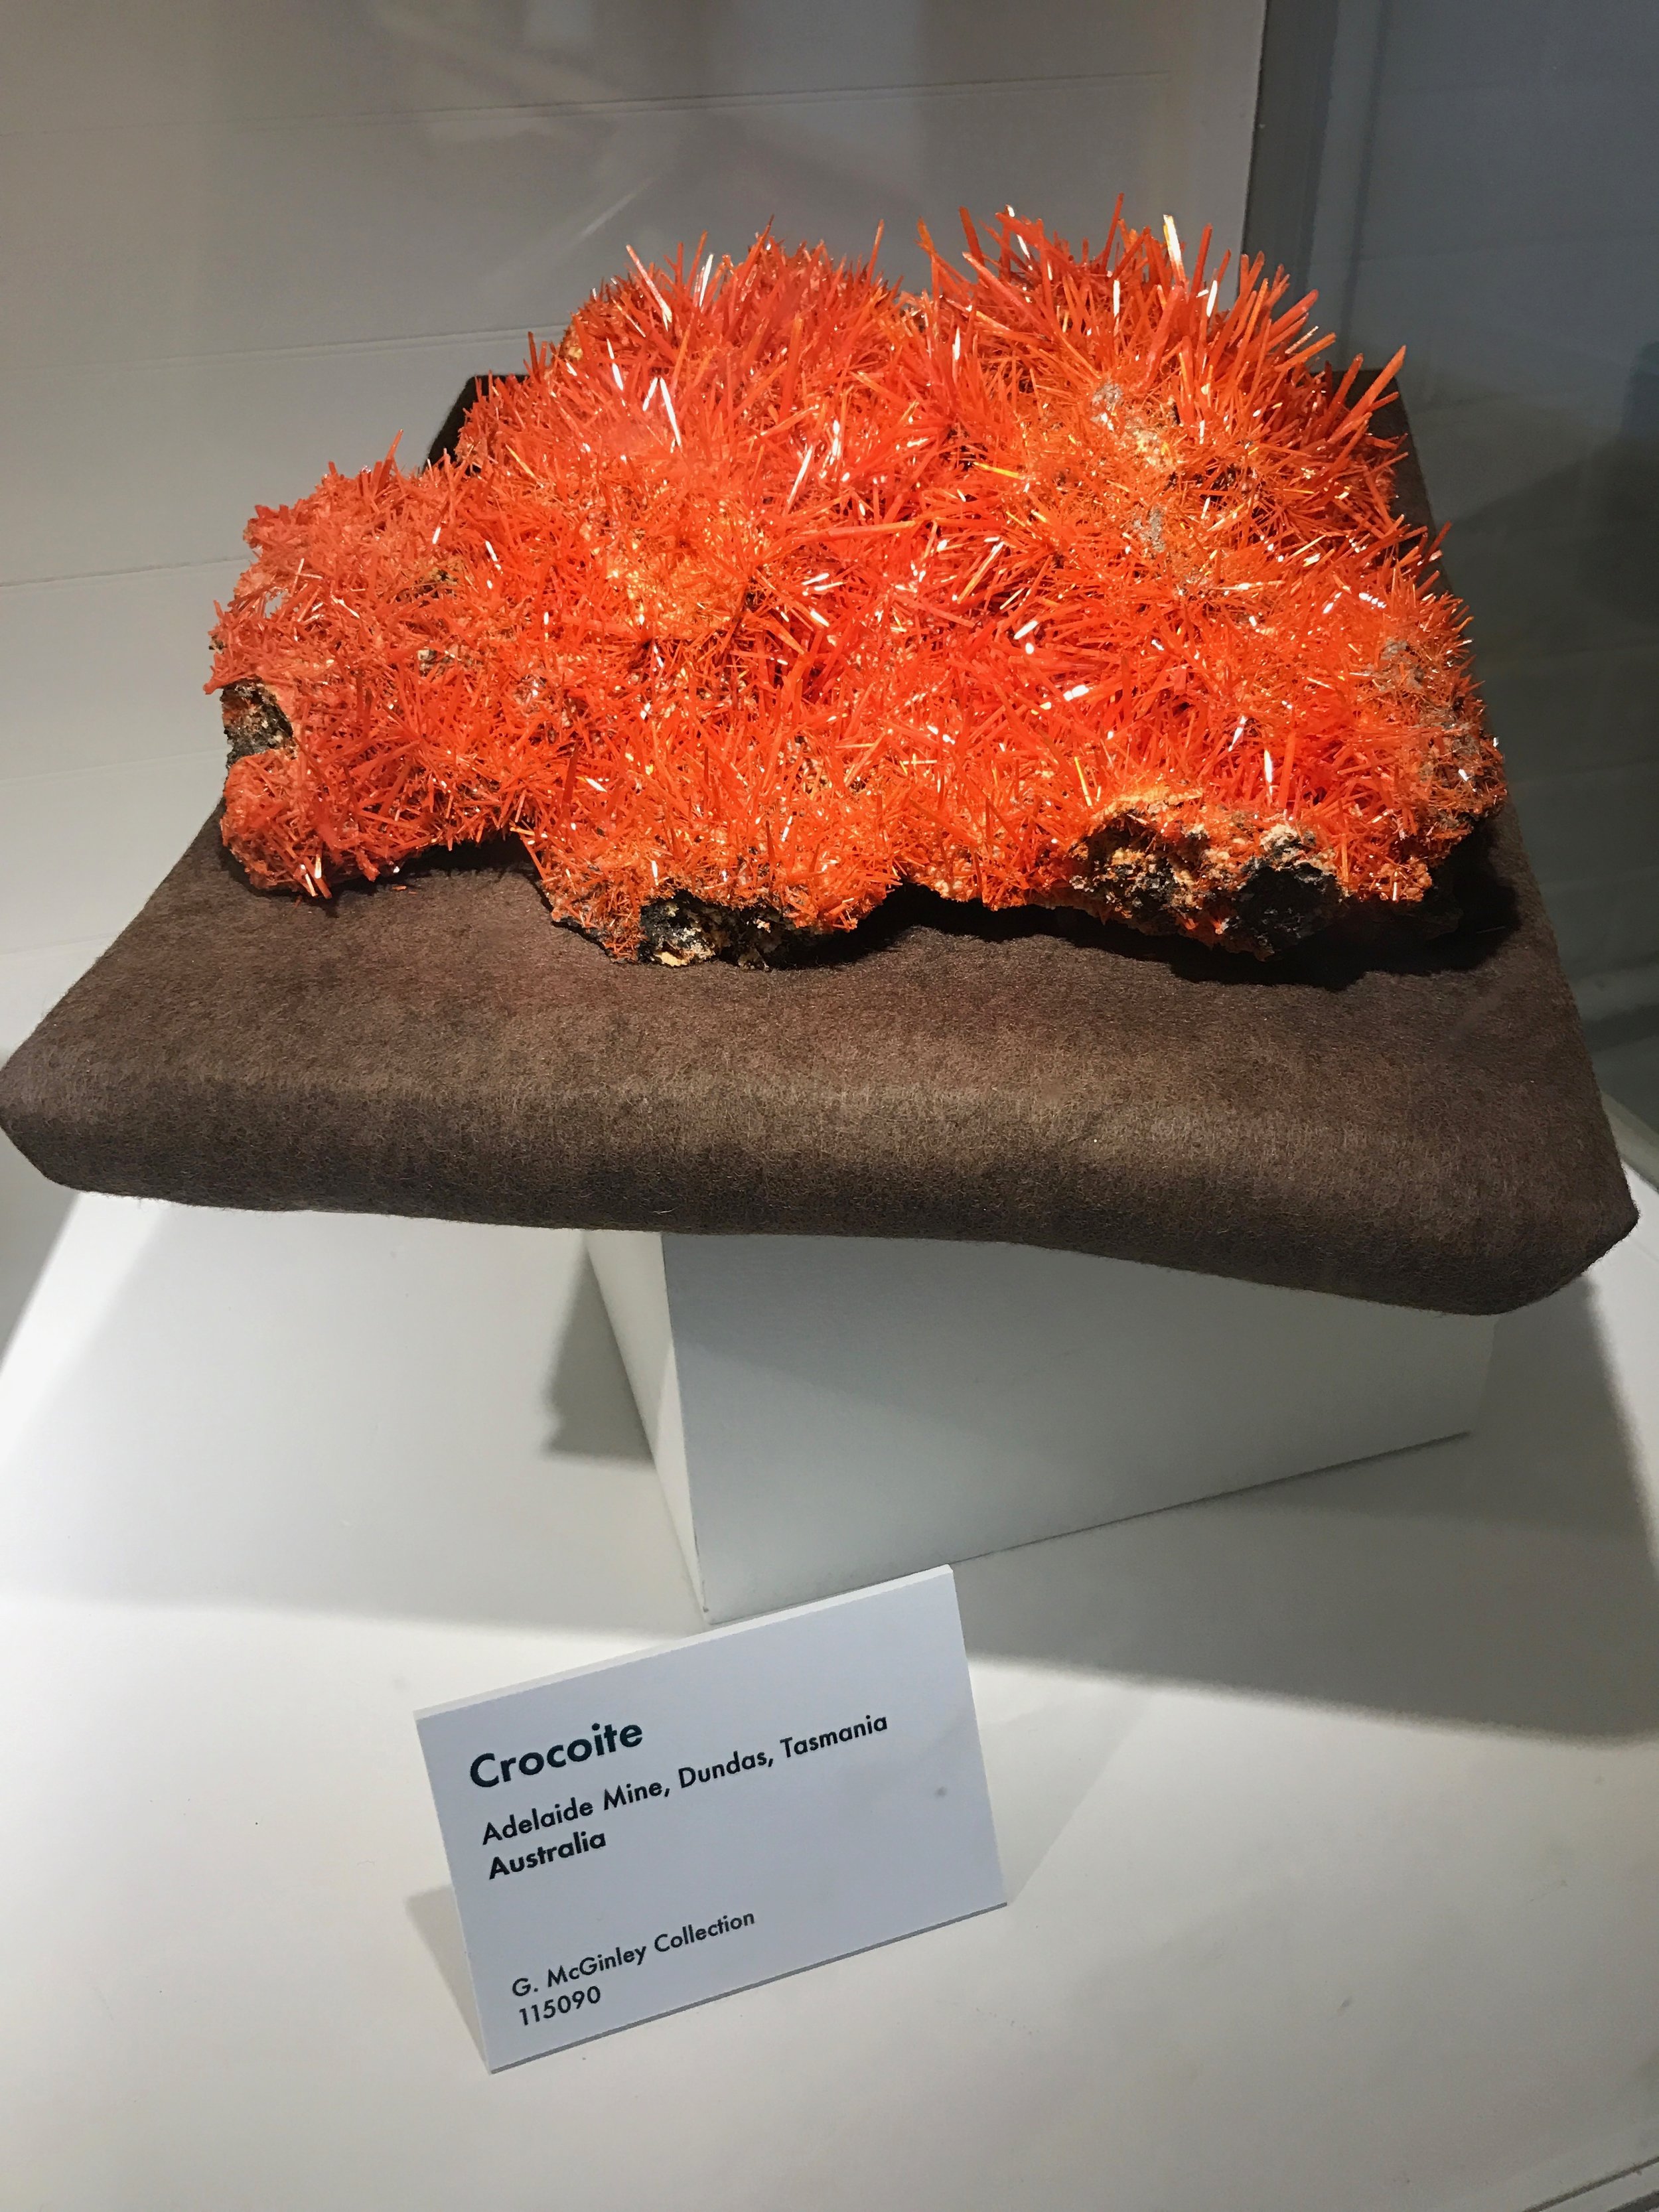 My favorite mineral